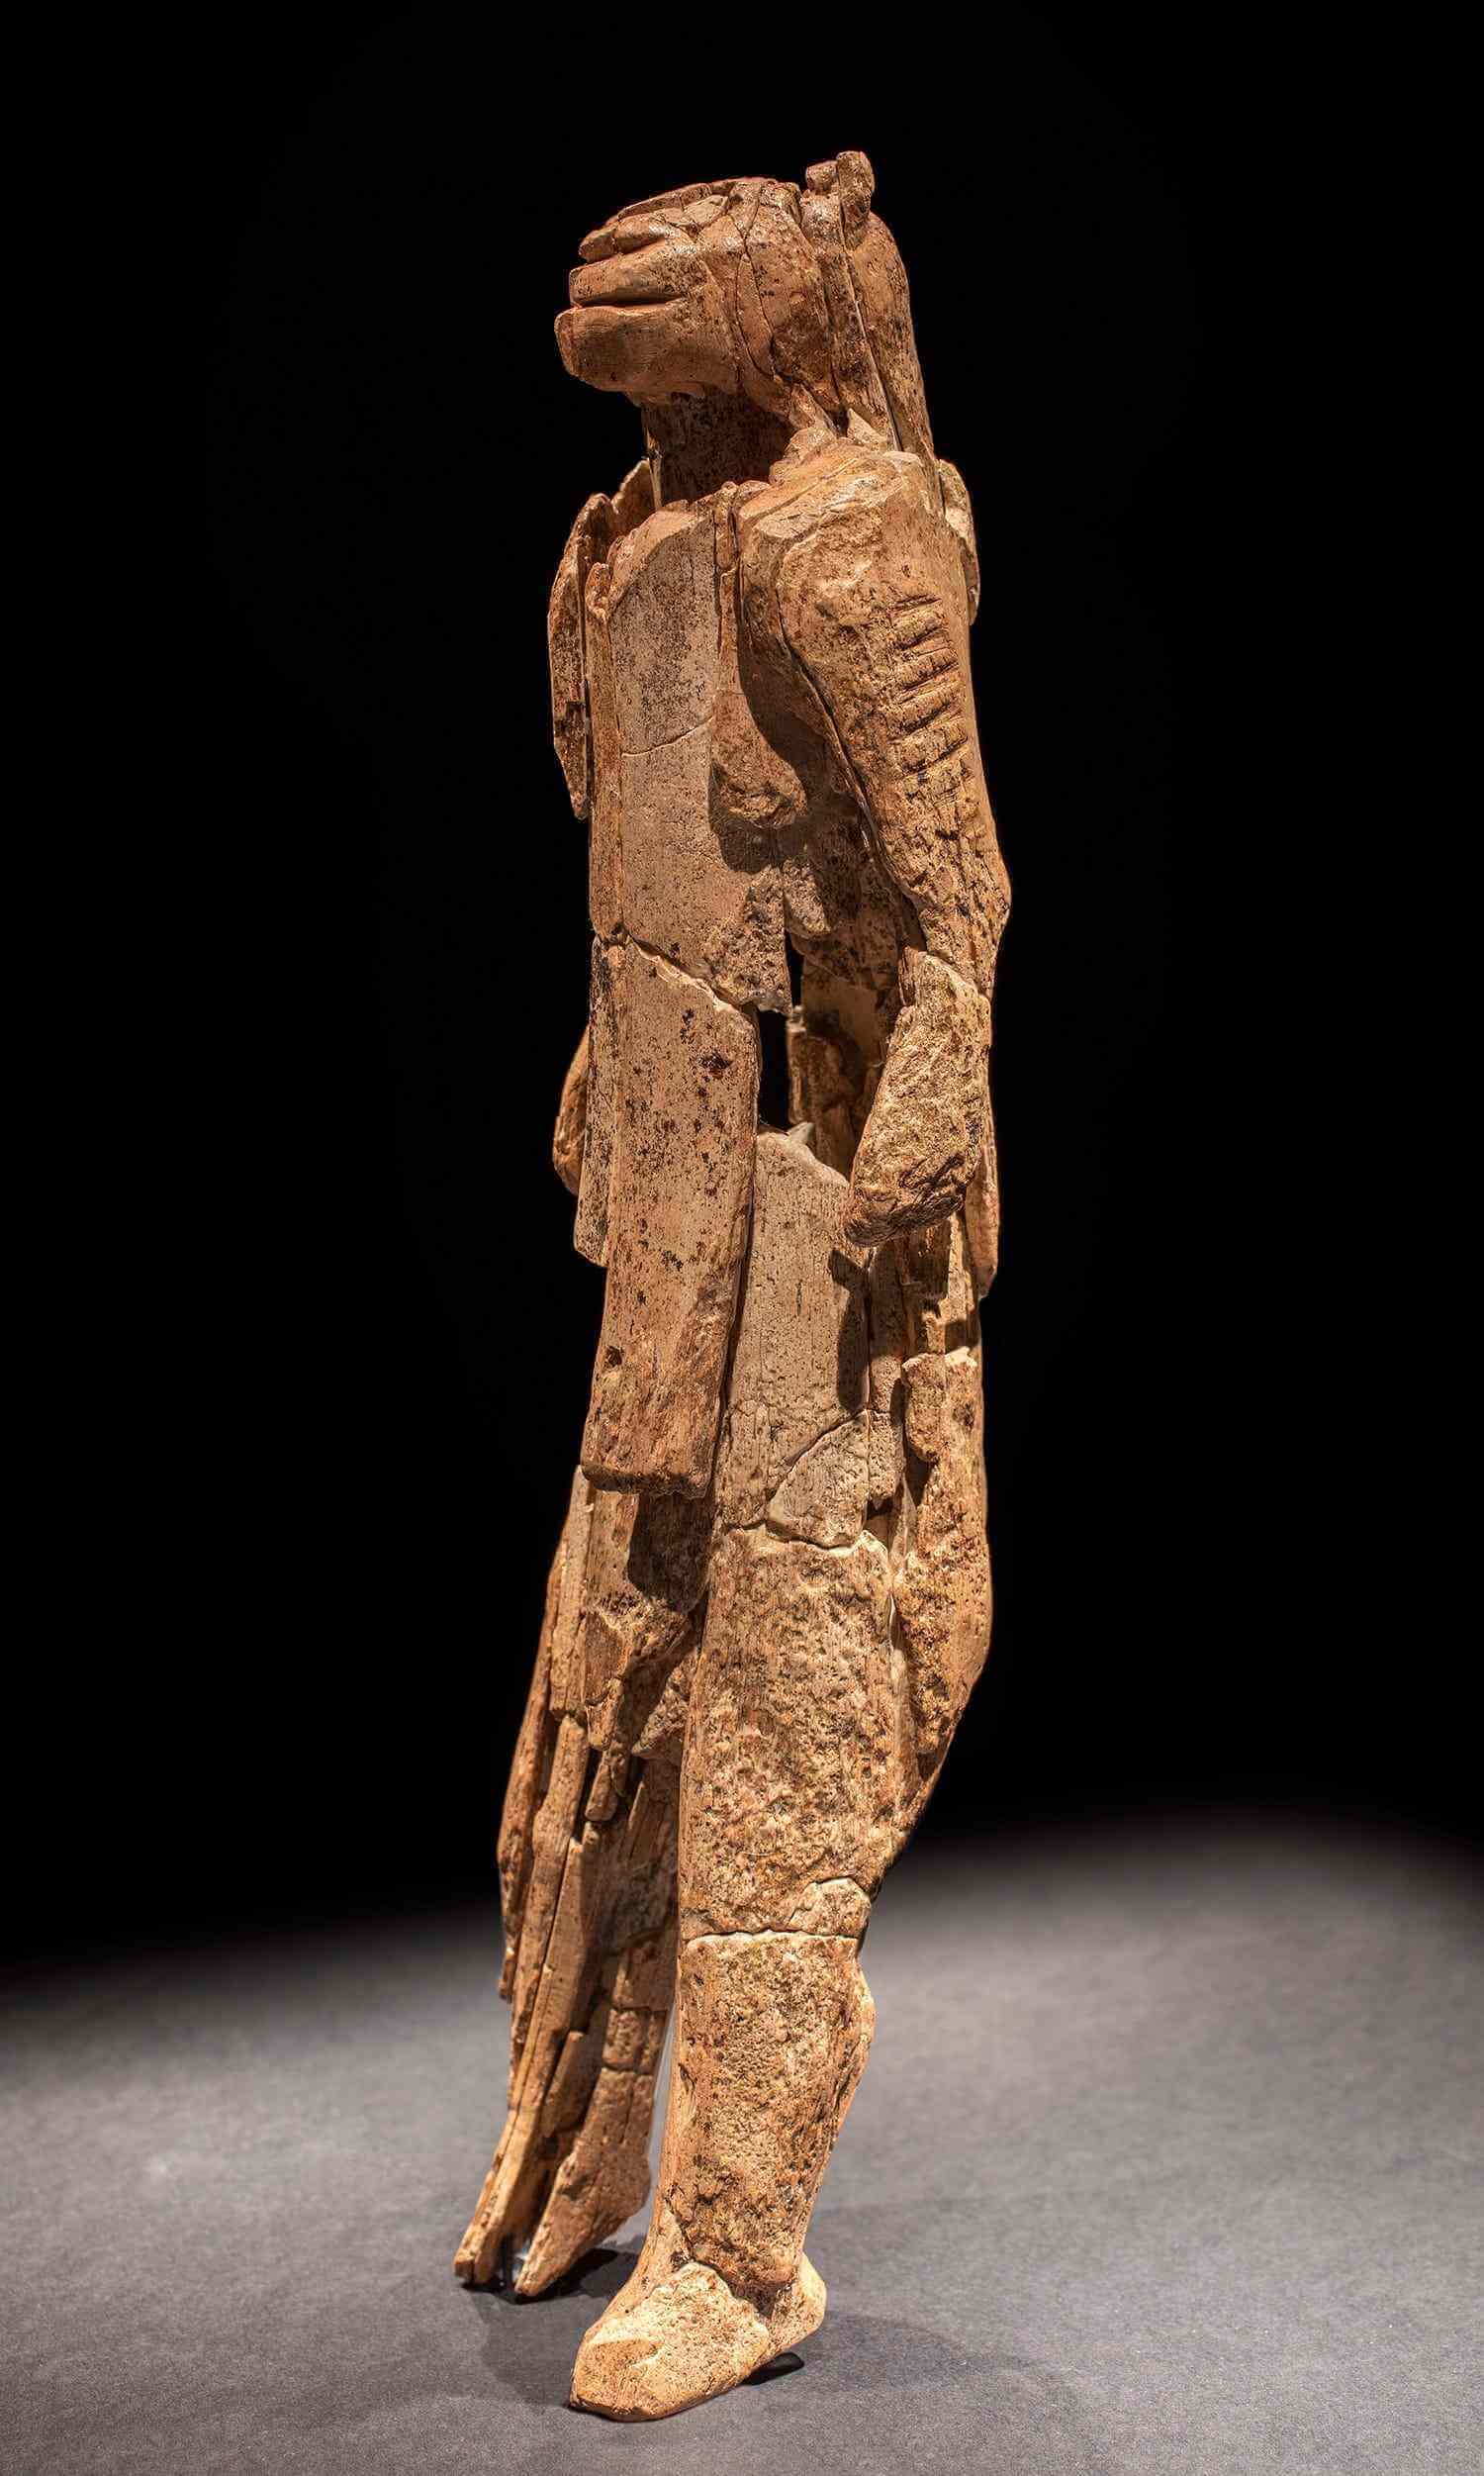 The Löwenmensch figurine or Lion-man of the Hohlenstein-Stadel is a prehistoric ivory sculpture discovered in the Hohlenstein-Stadel, a German cave in 1939. It’s nearly 40,000 years old.